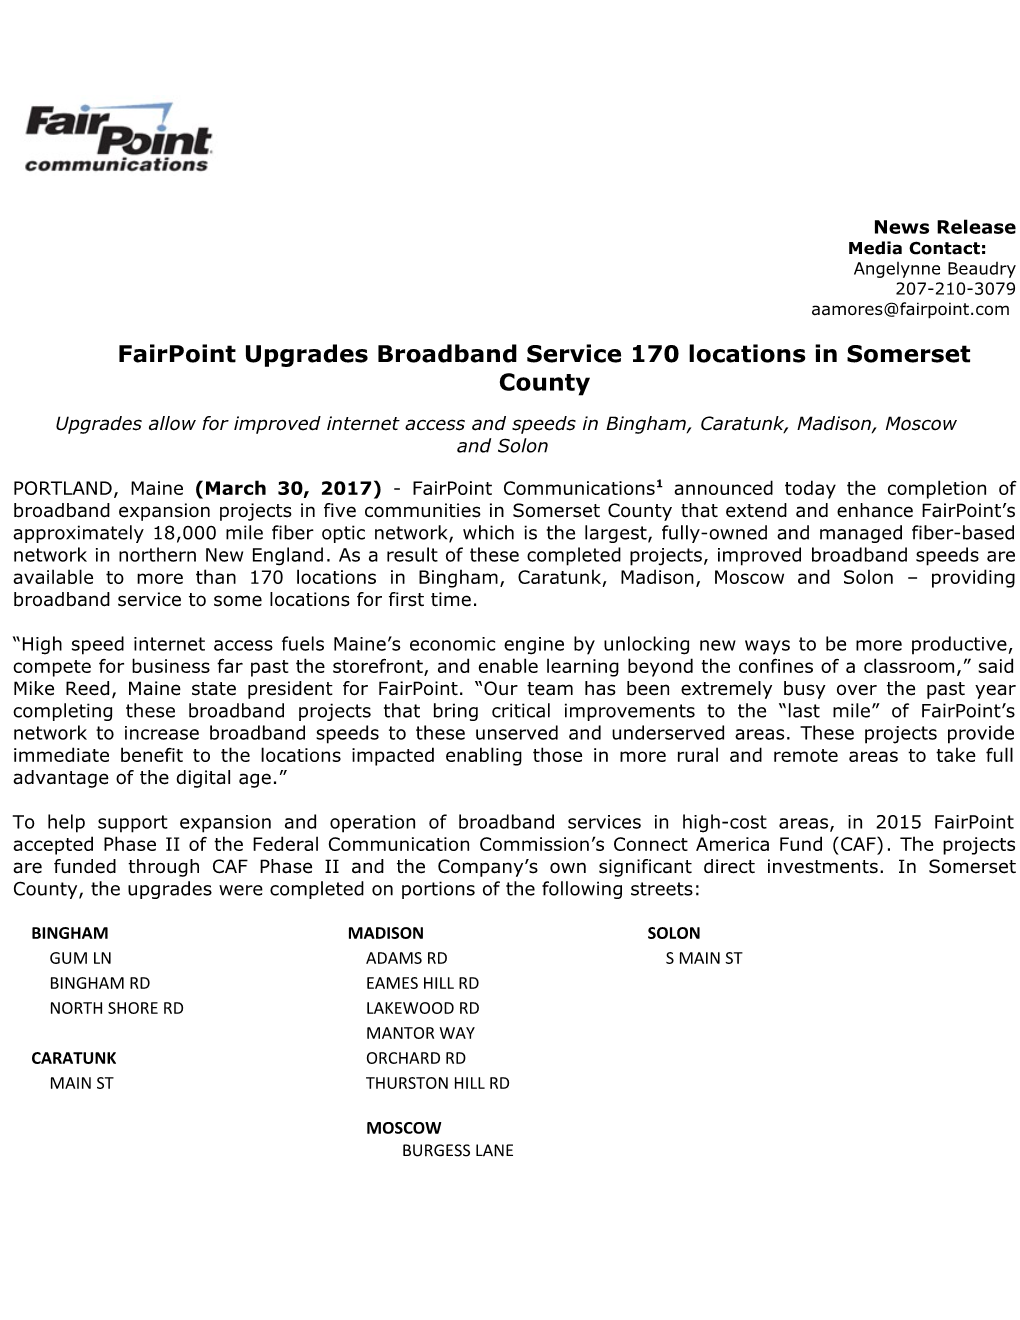 Fairpoint Upgrades Broadband Service 170 Locations in Somerset County